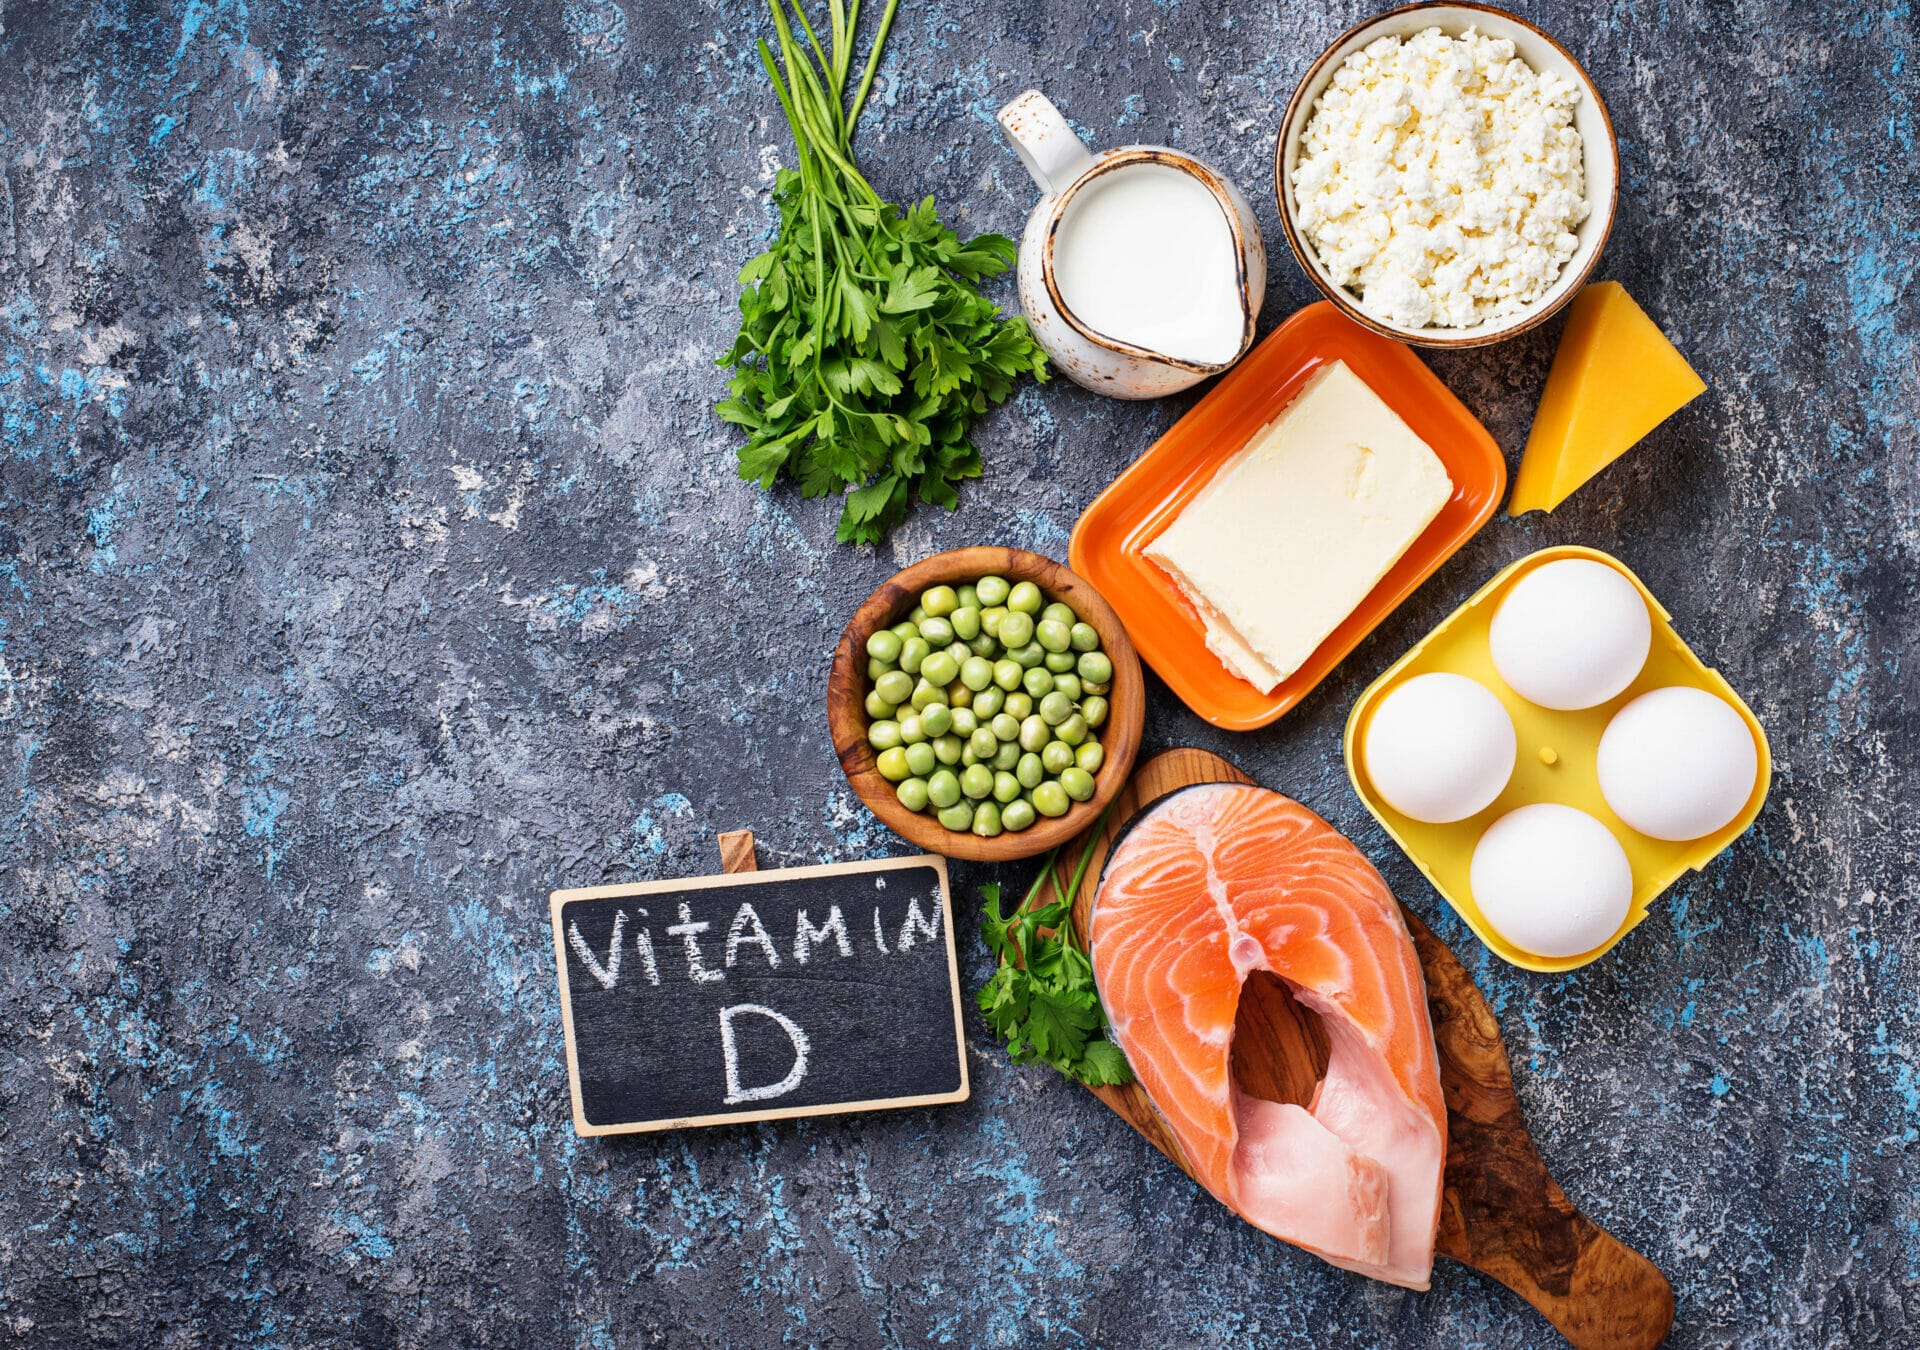 The Top 7 Vitamin and Supplement Trends of 2022